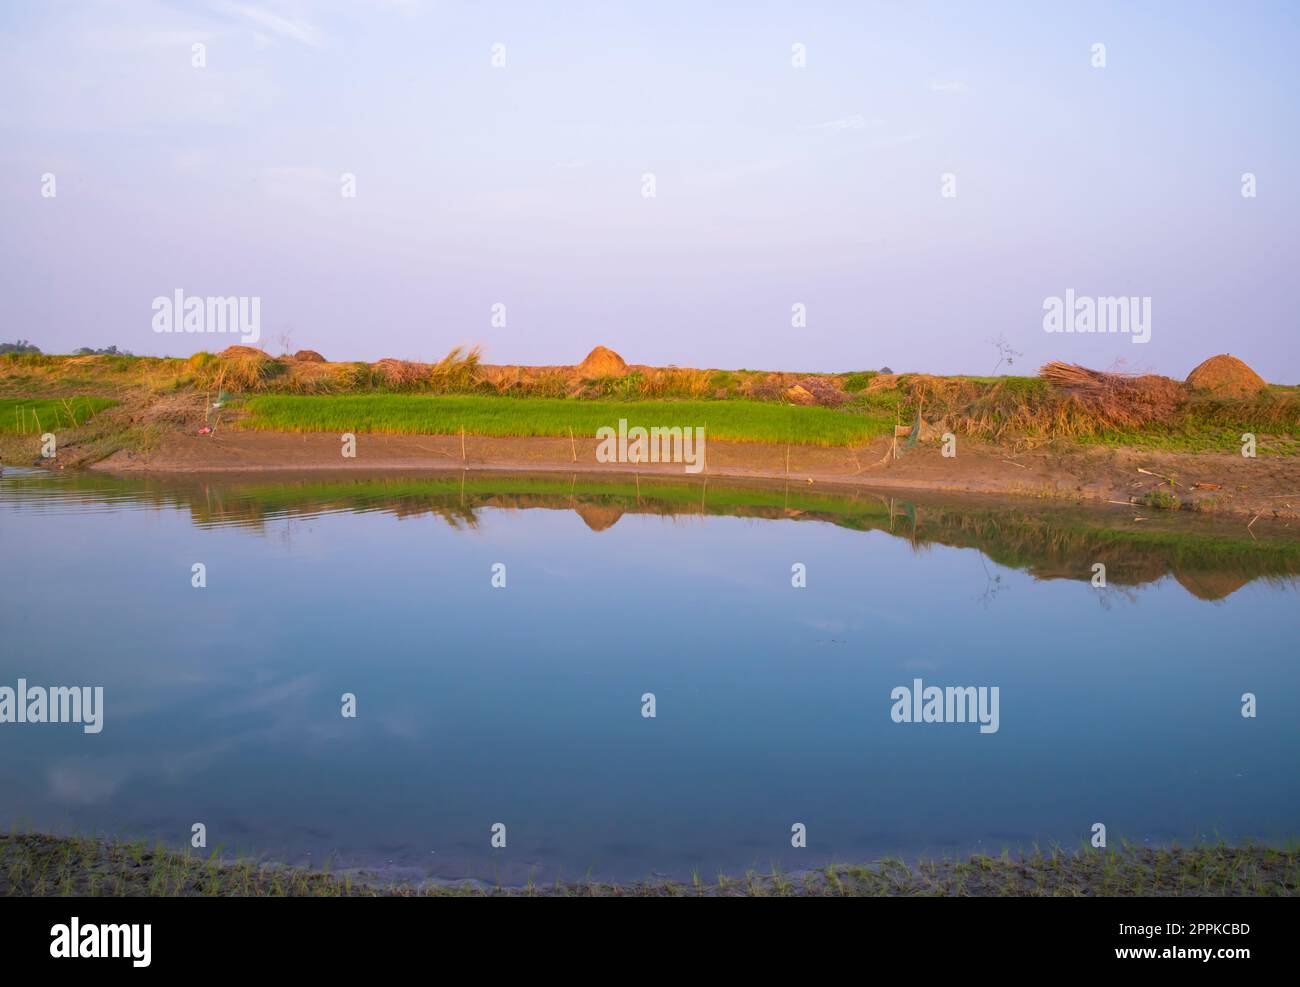 Canal with green grass and vegetation reflected in the water nearby Padma river in Bangladesh Stock Photo